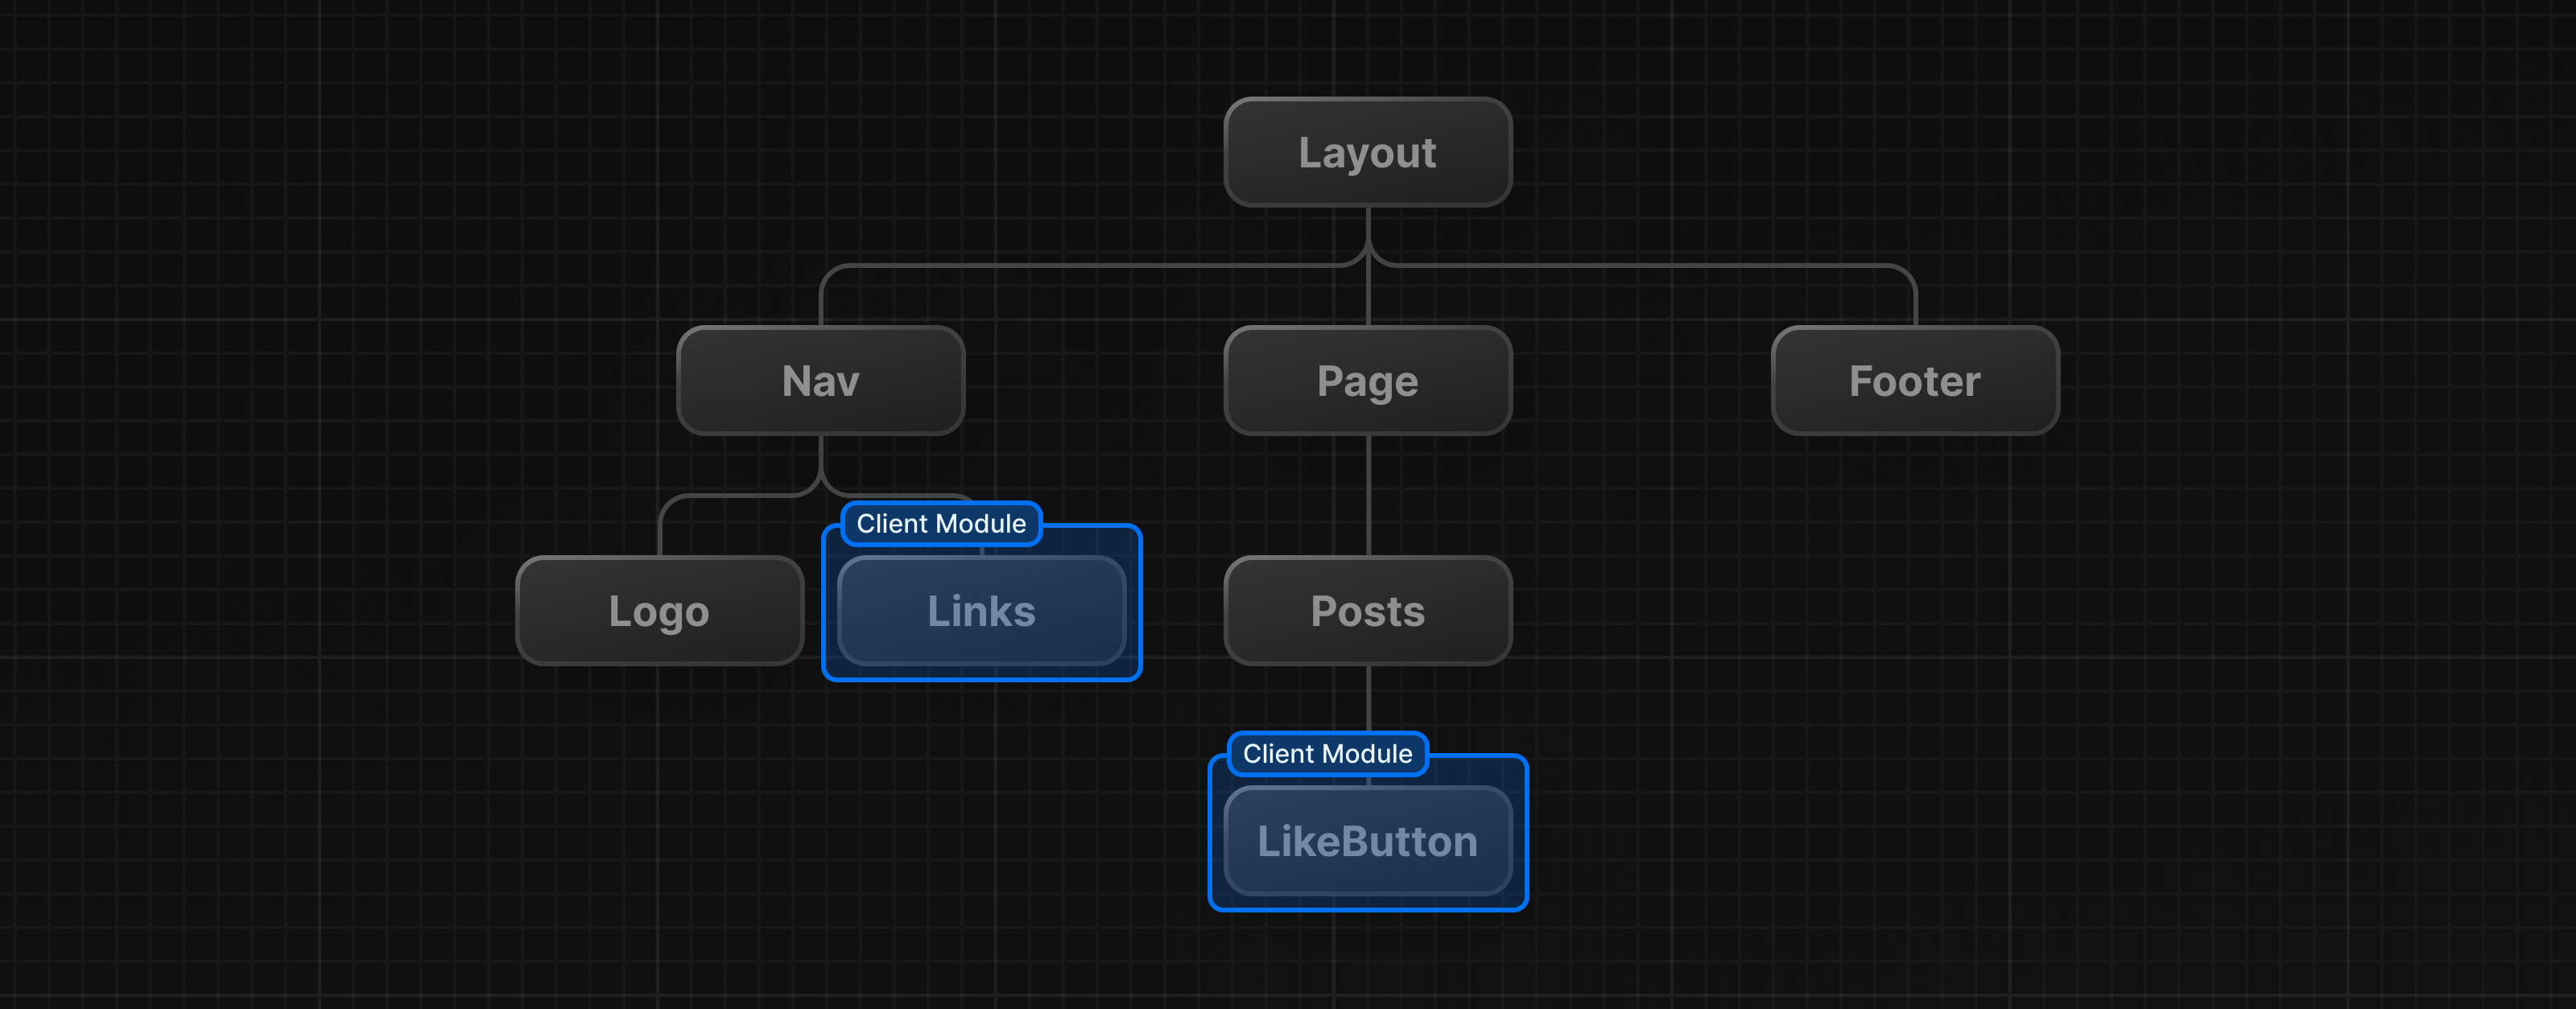 A component tree showing a layout that has 3 components as its children: Nav, Page, and Footer. The page component has 2 children: Posts and LikeButton. The Posts component is rendered on the server, and the LikeButton component is rendered on the client.